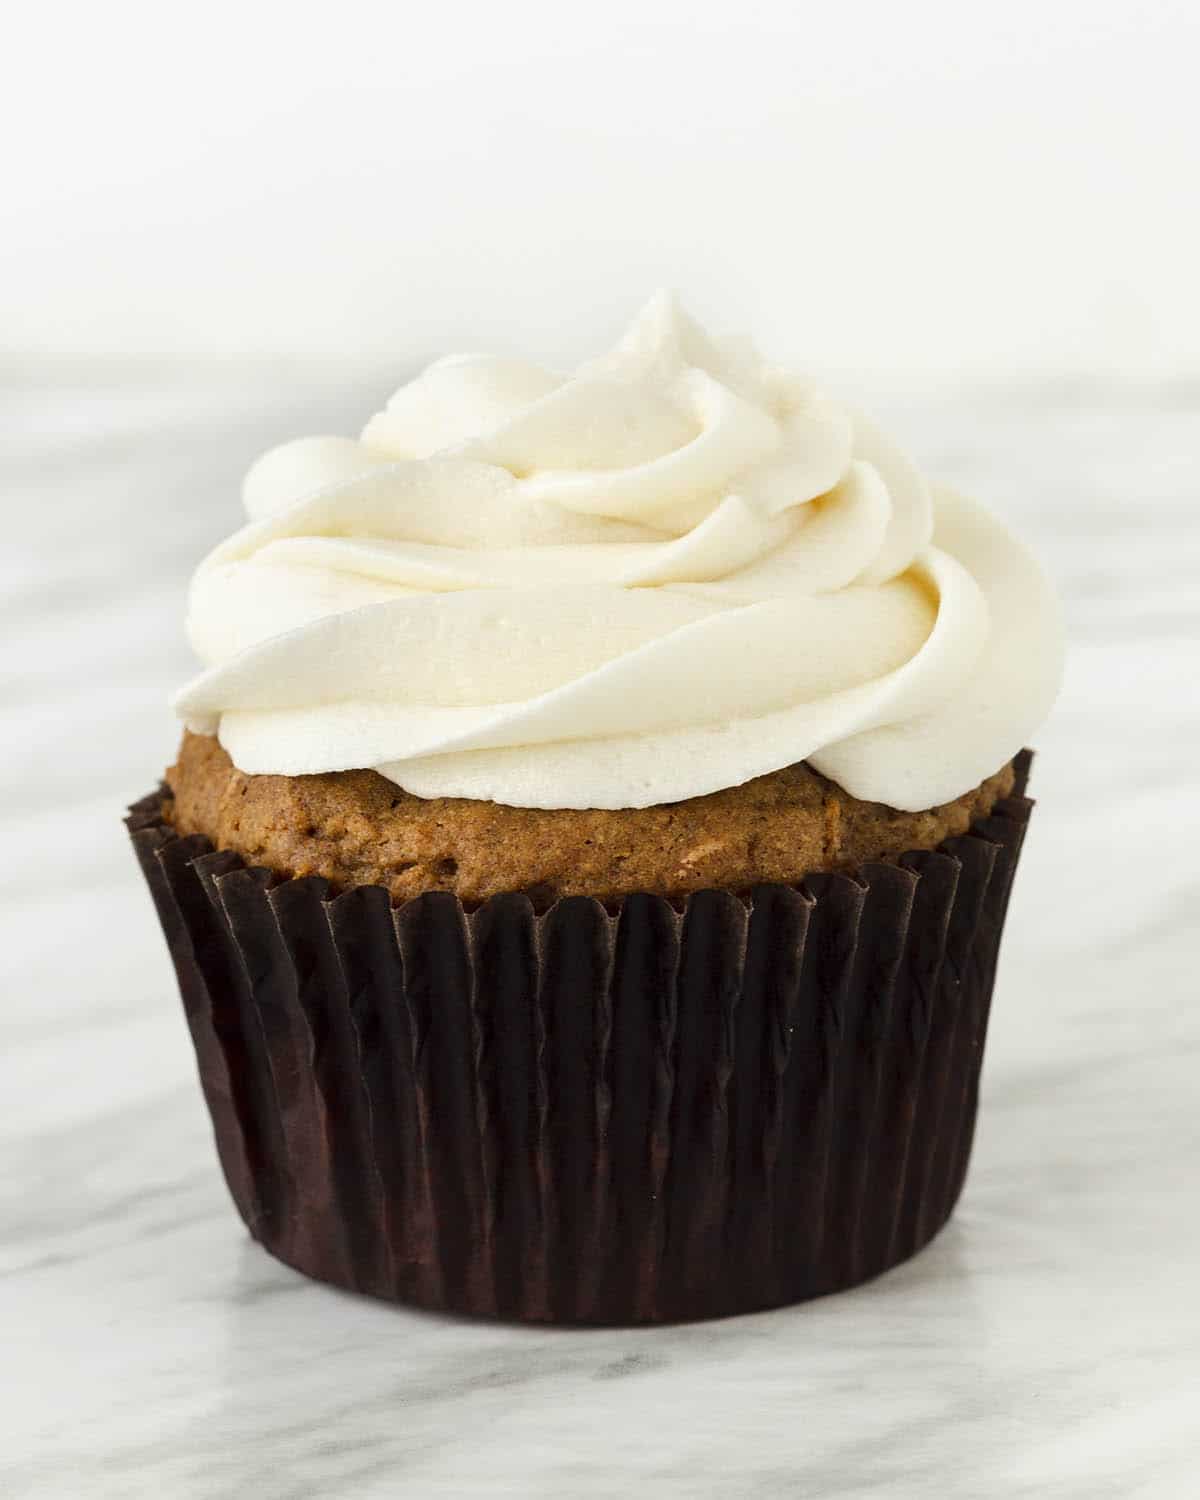 Image shows a carrot cupcake topped with non-dairy cream cheese icing.